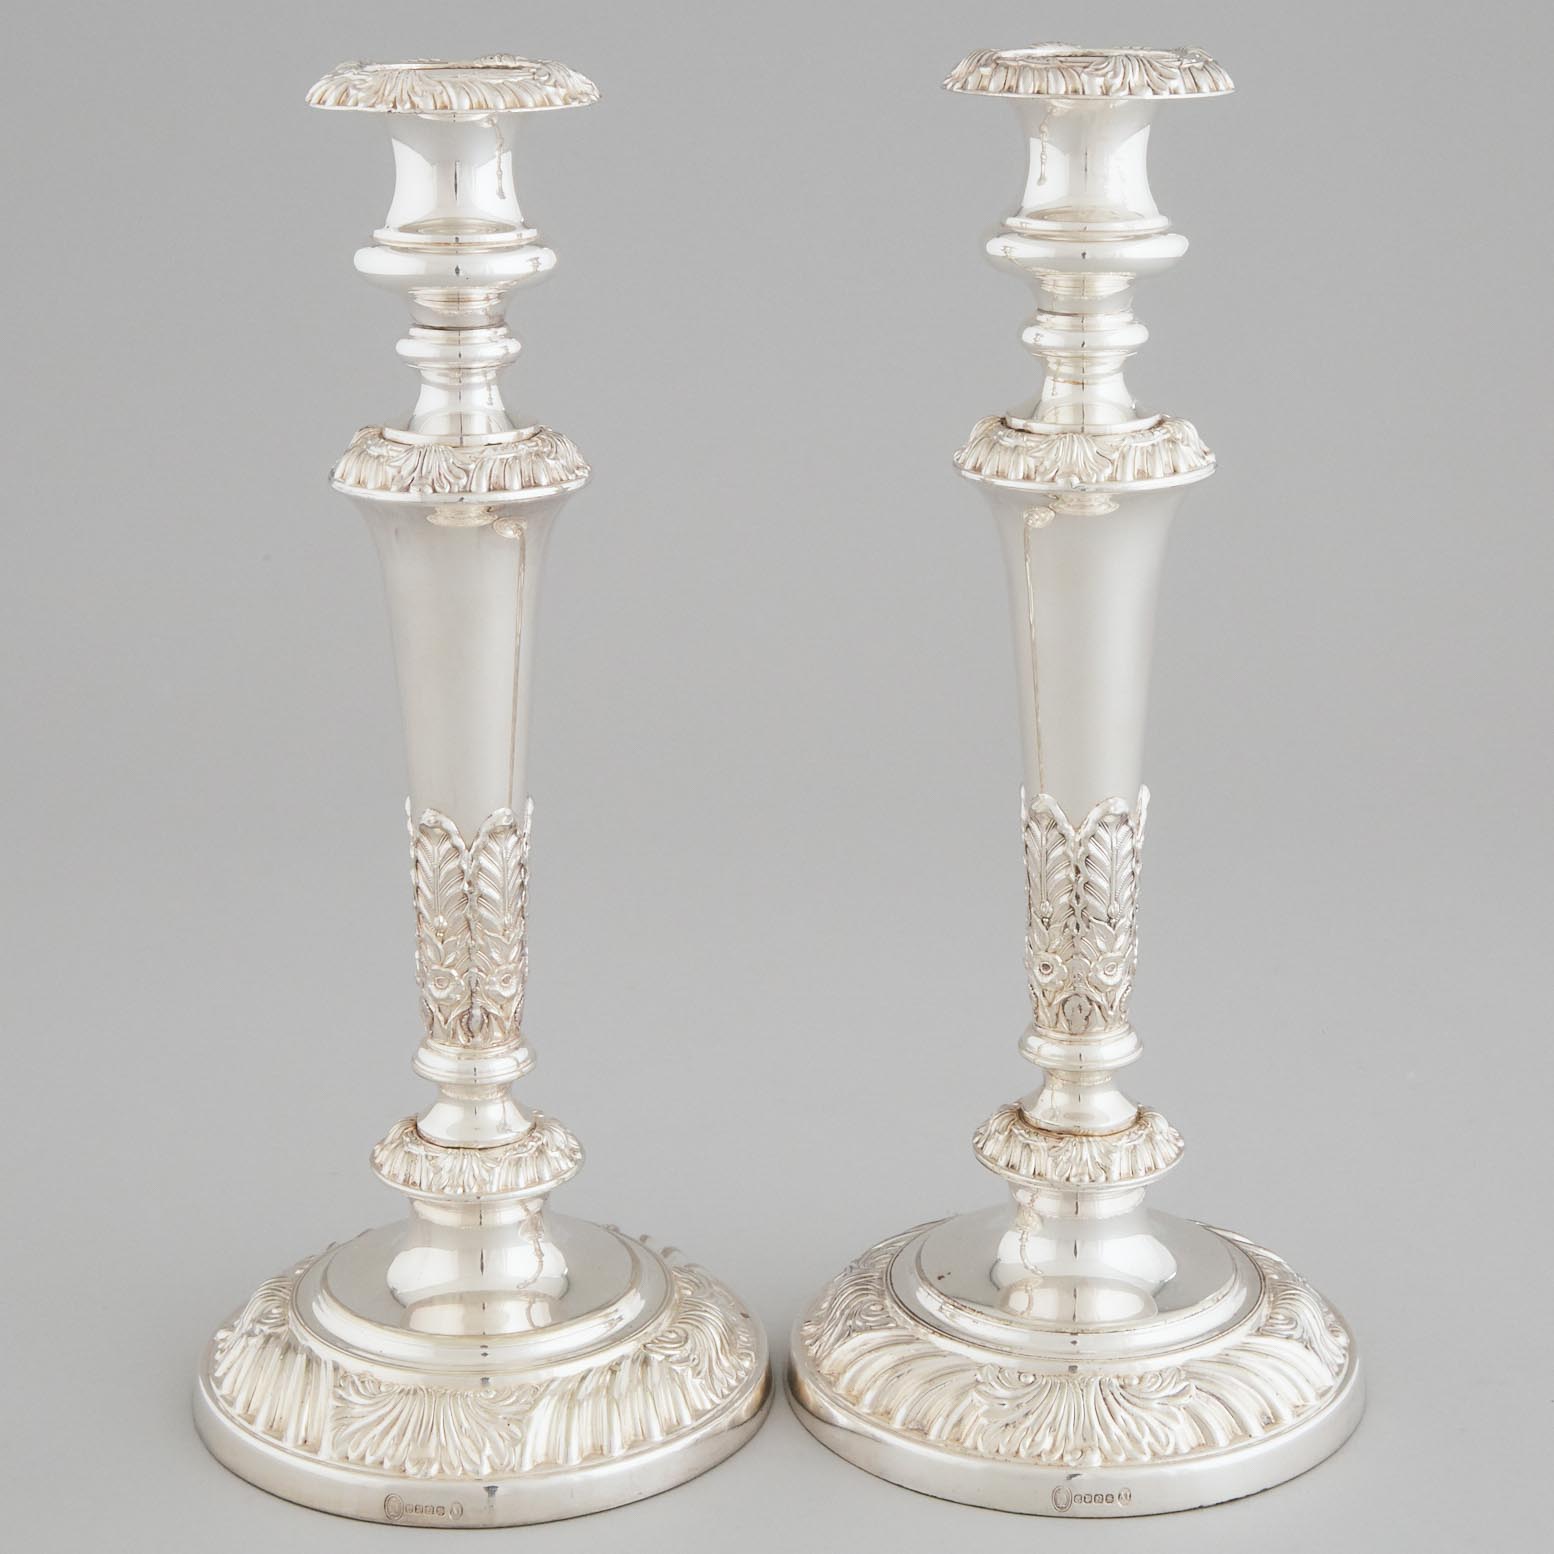 Pair of English Silver Plated Table 3ac102